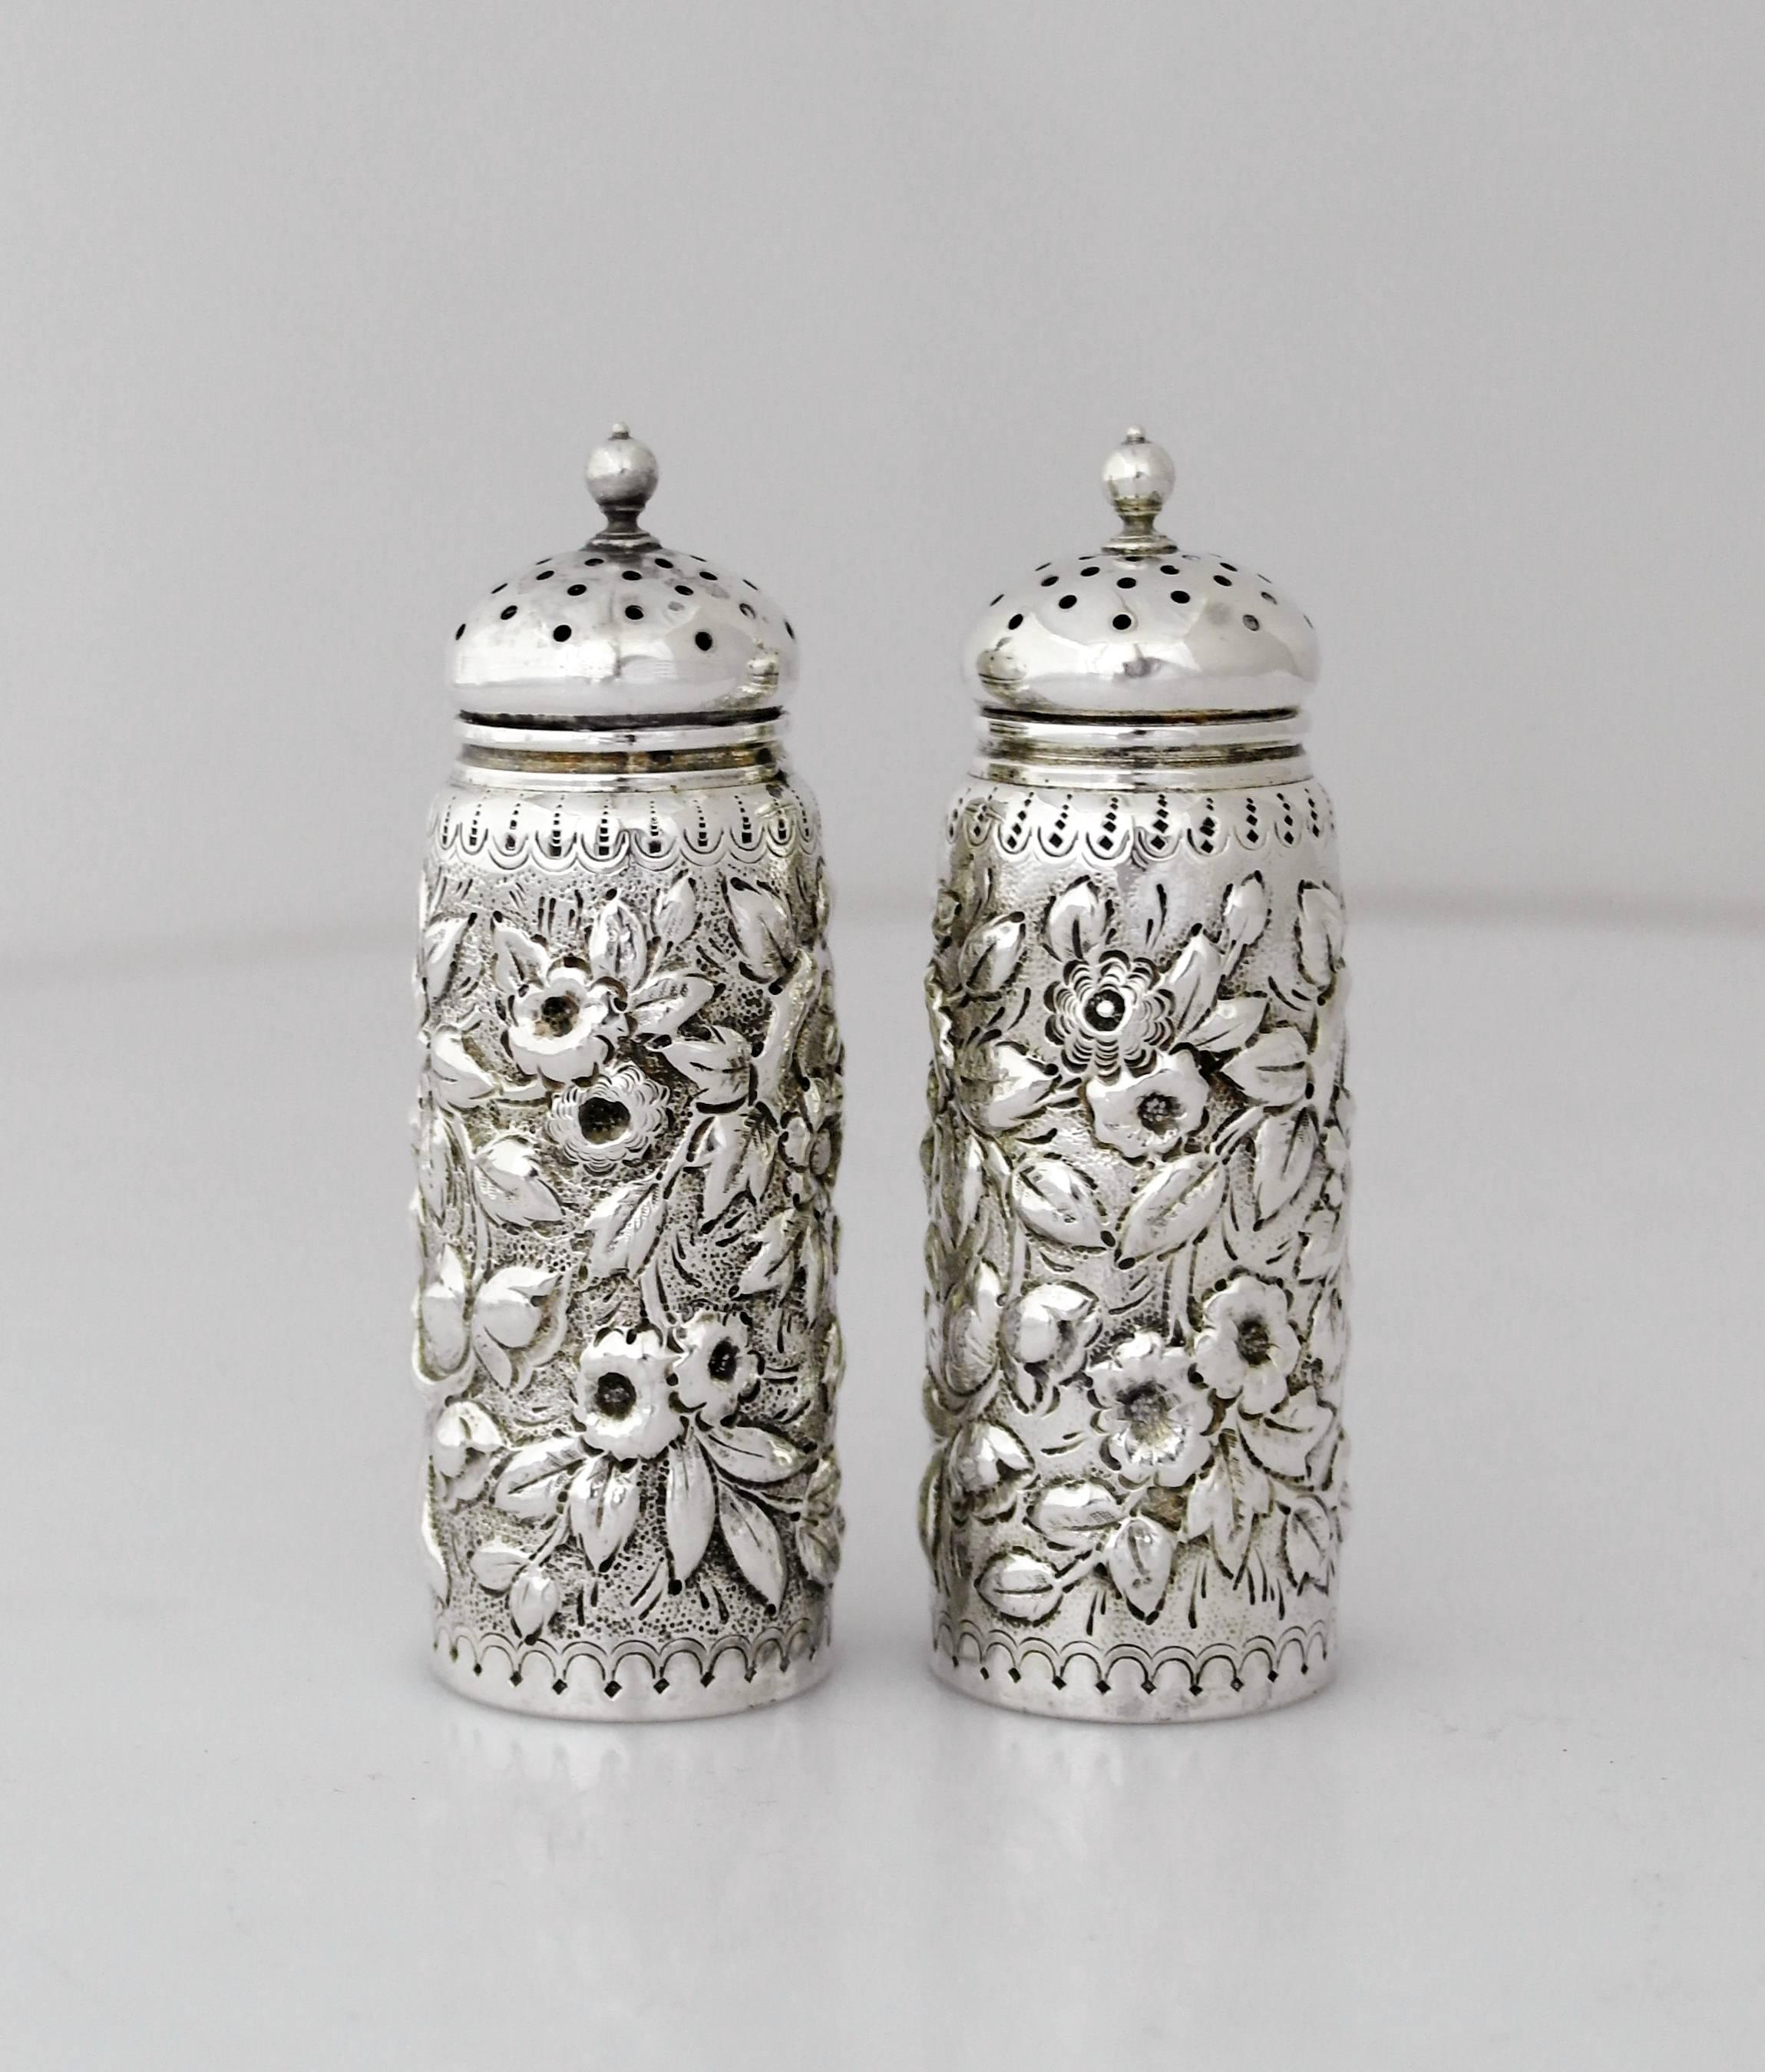 American Dominick & Haff Sterling Silver Hand Chased Salt and Pepper Shakers